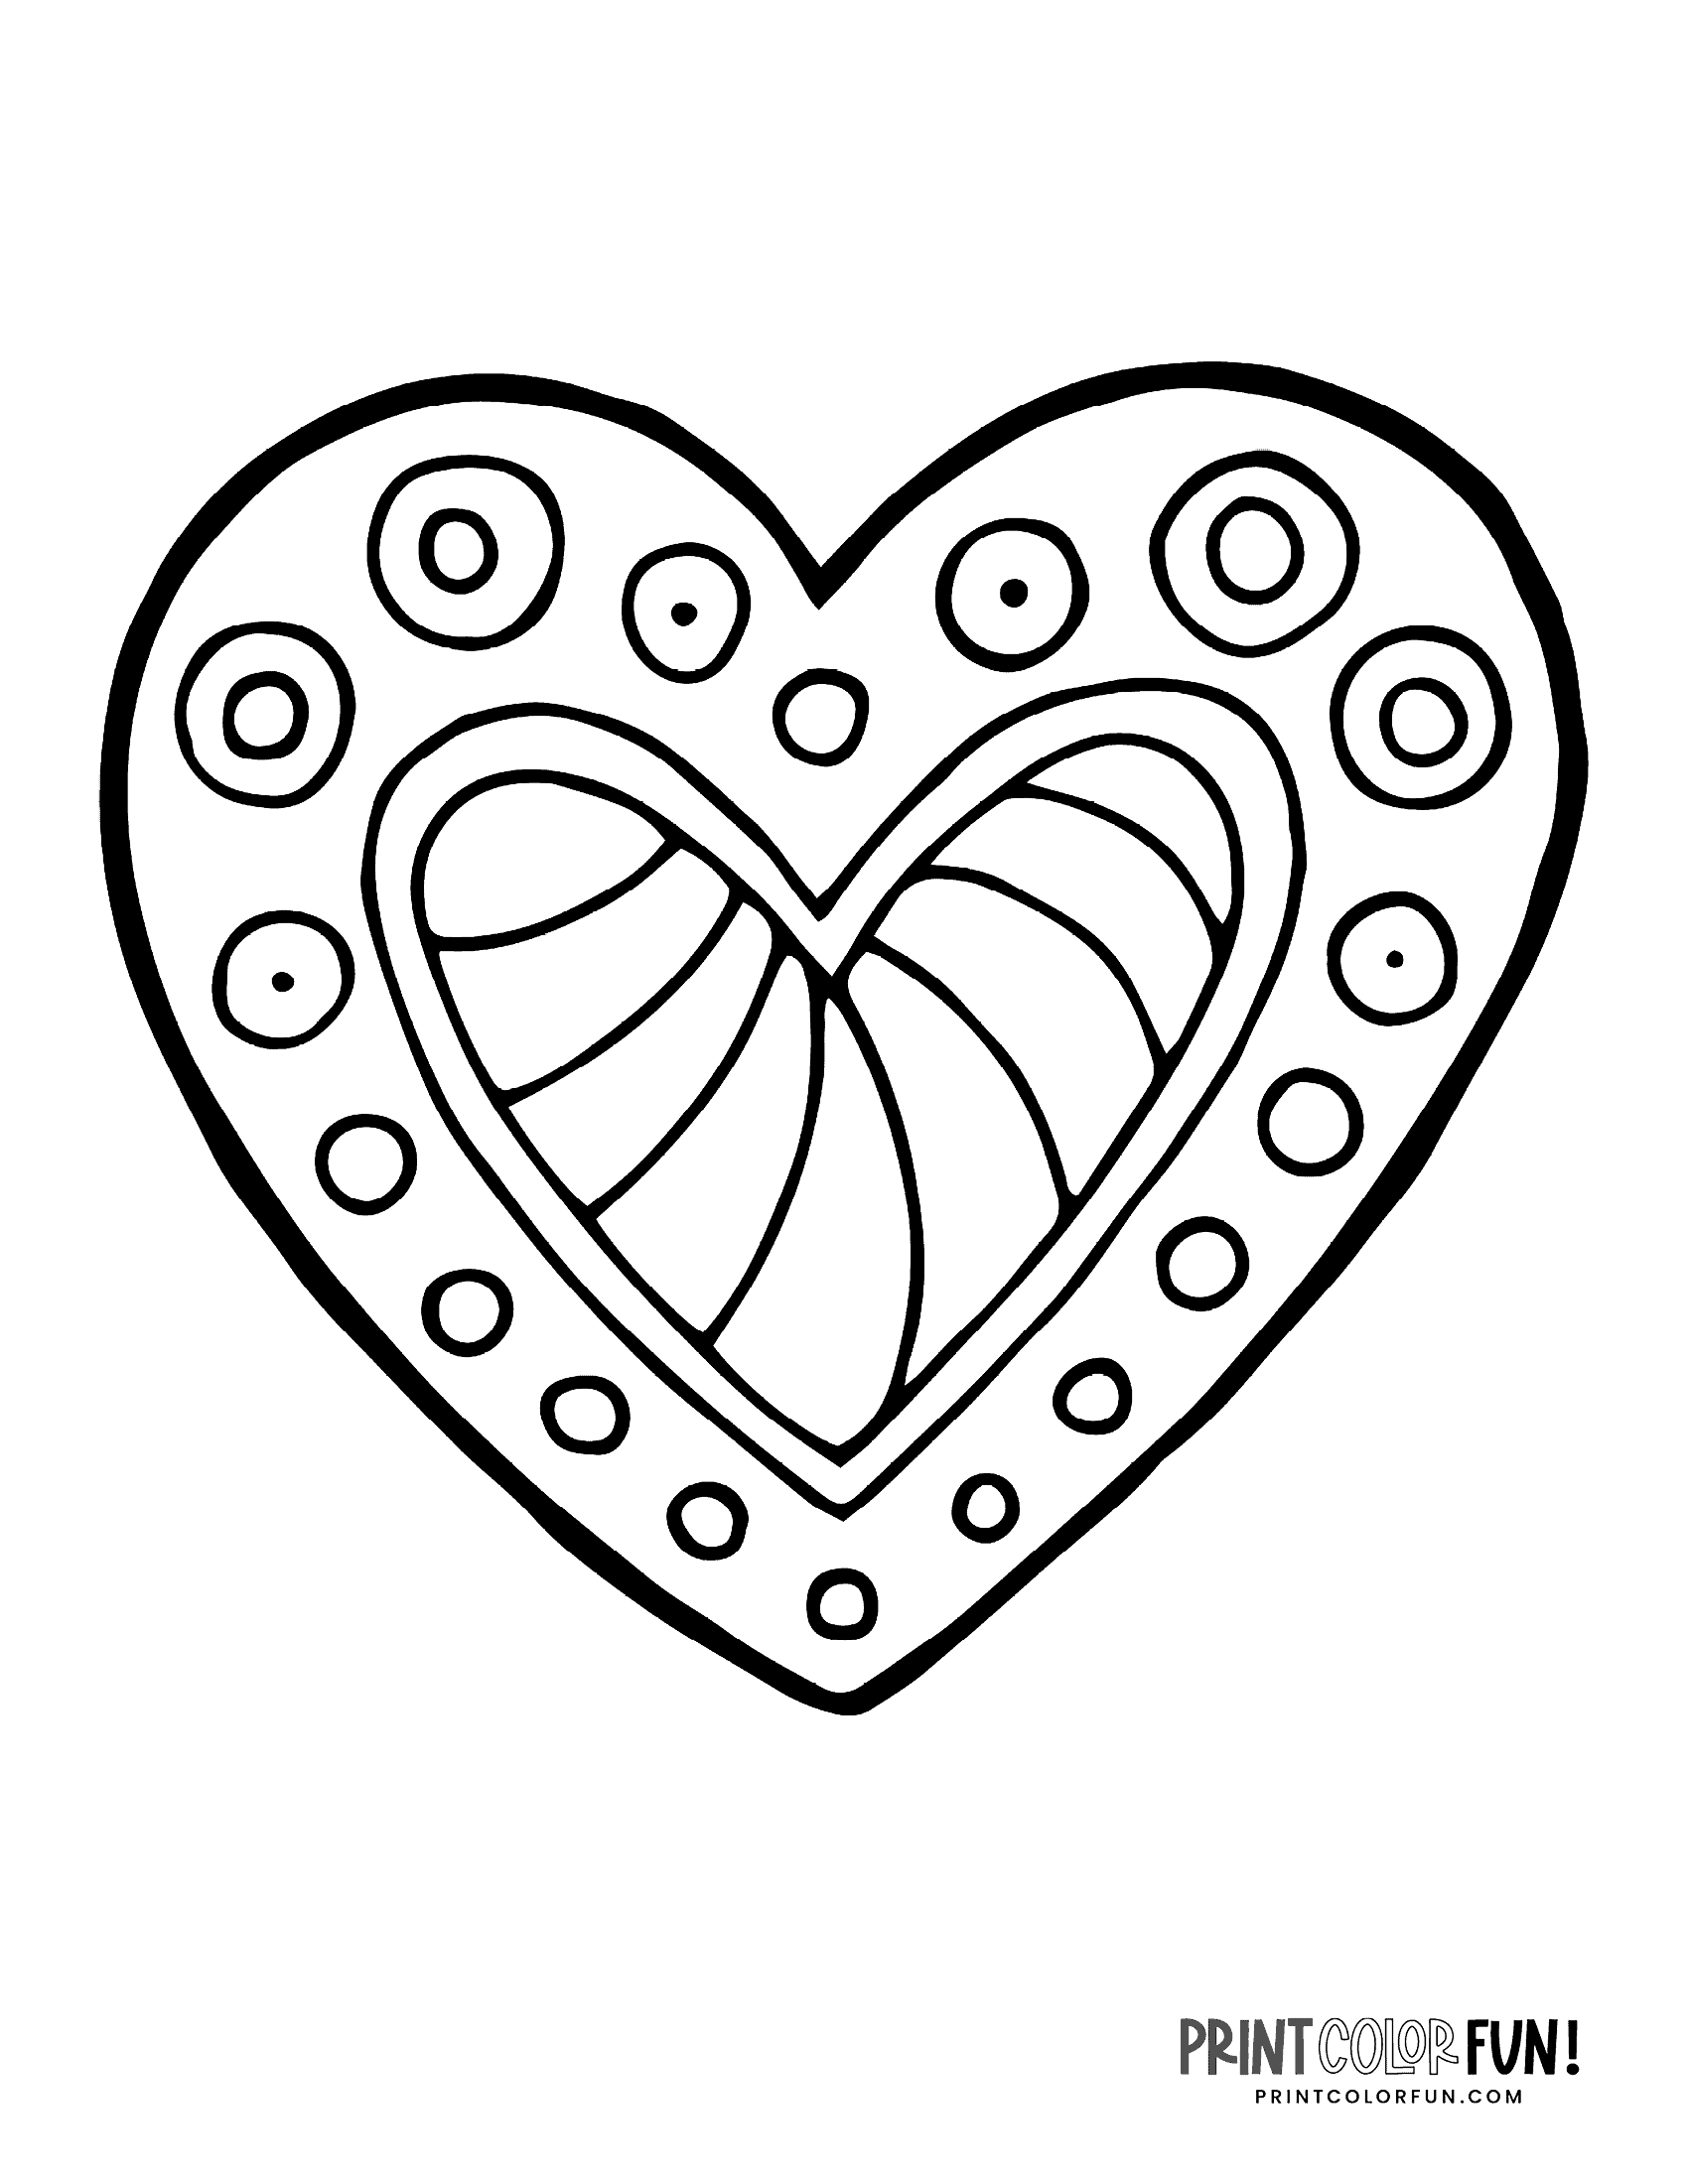 100+ heart coloring pages A huge collection of free Valentine's Day